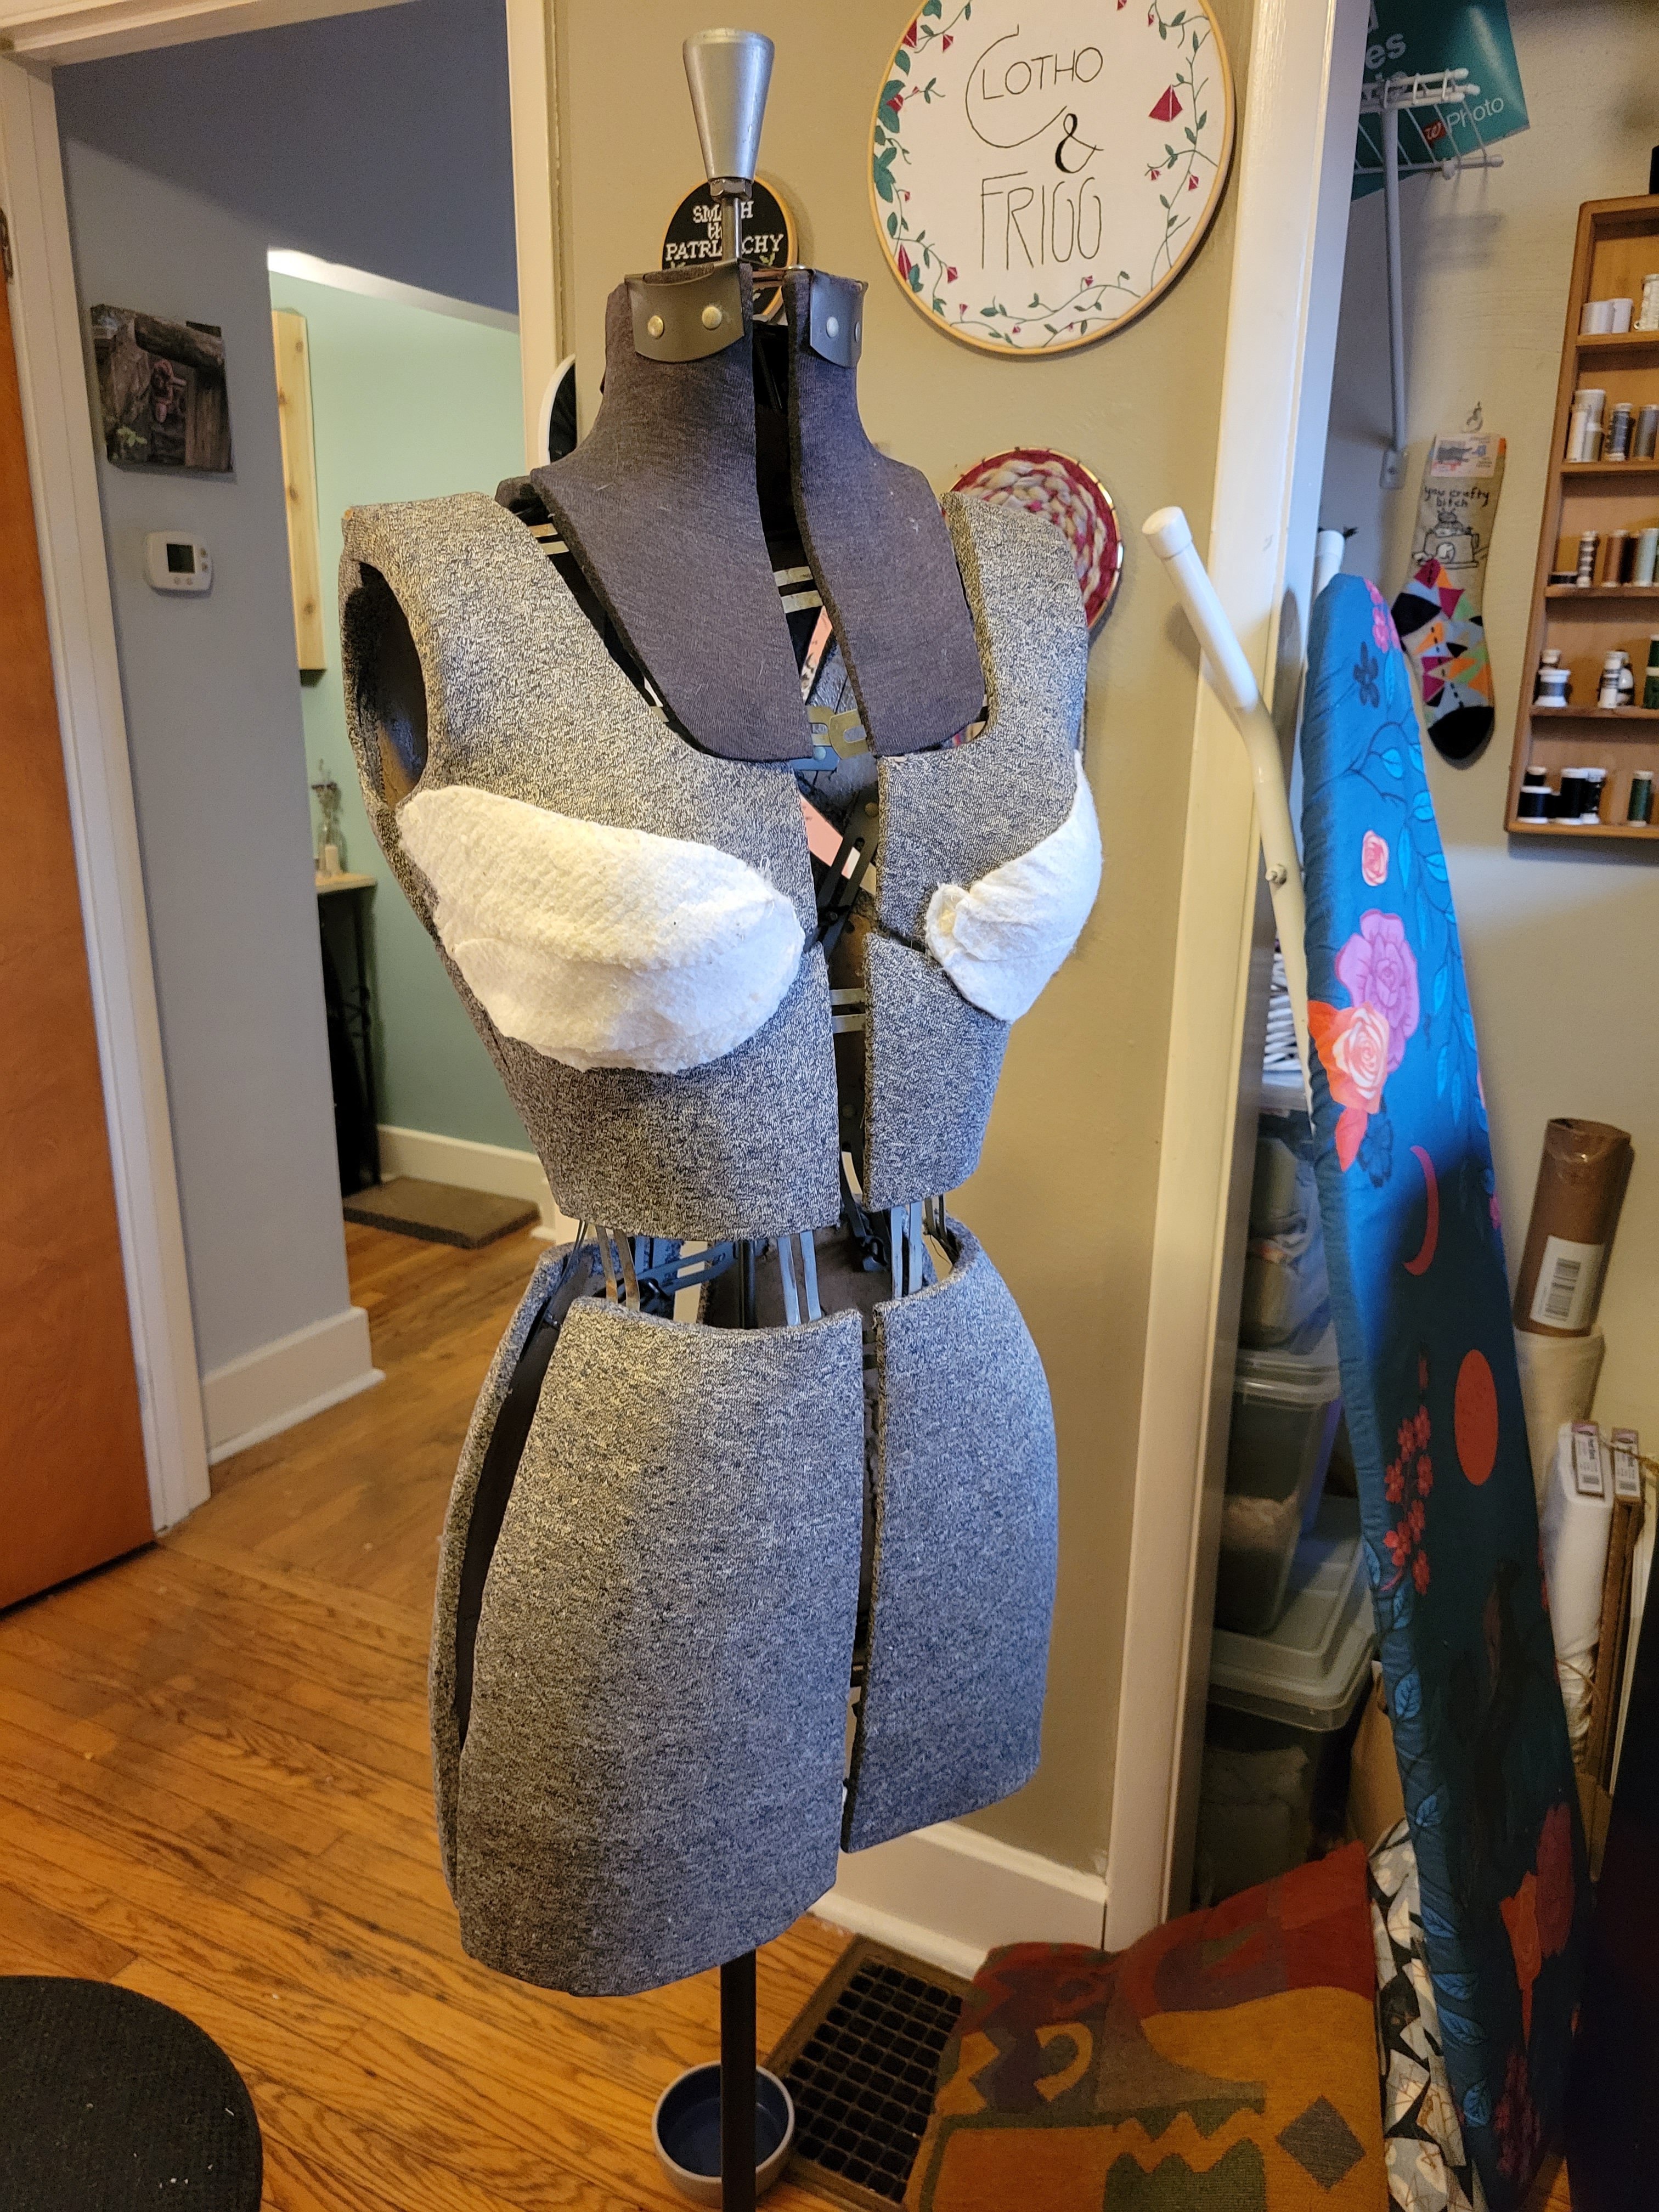 dress form with padding